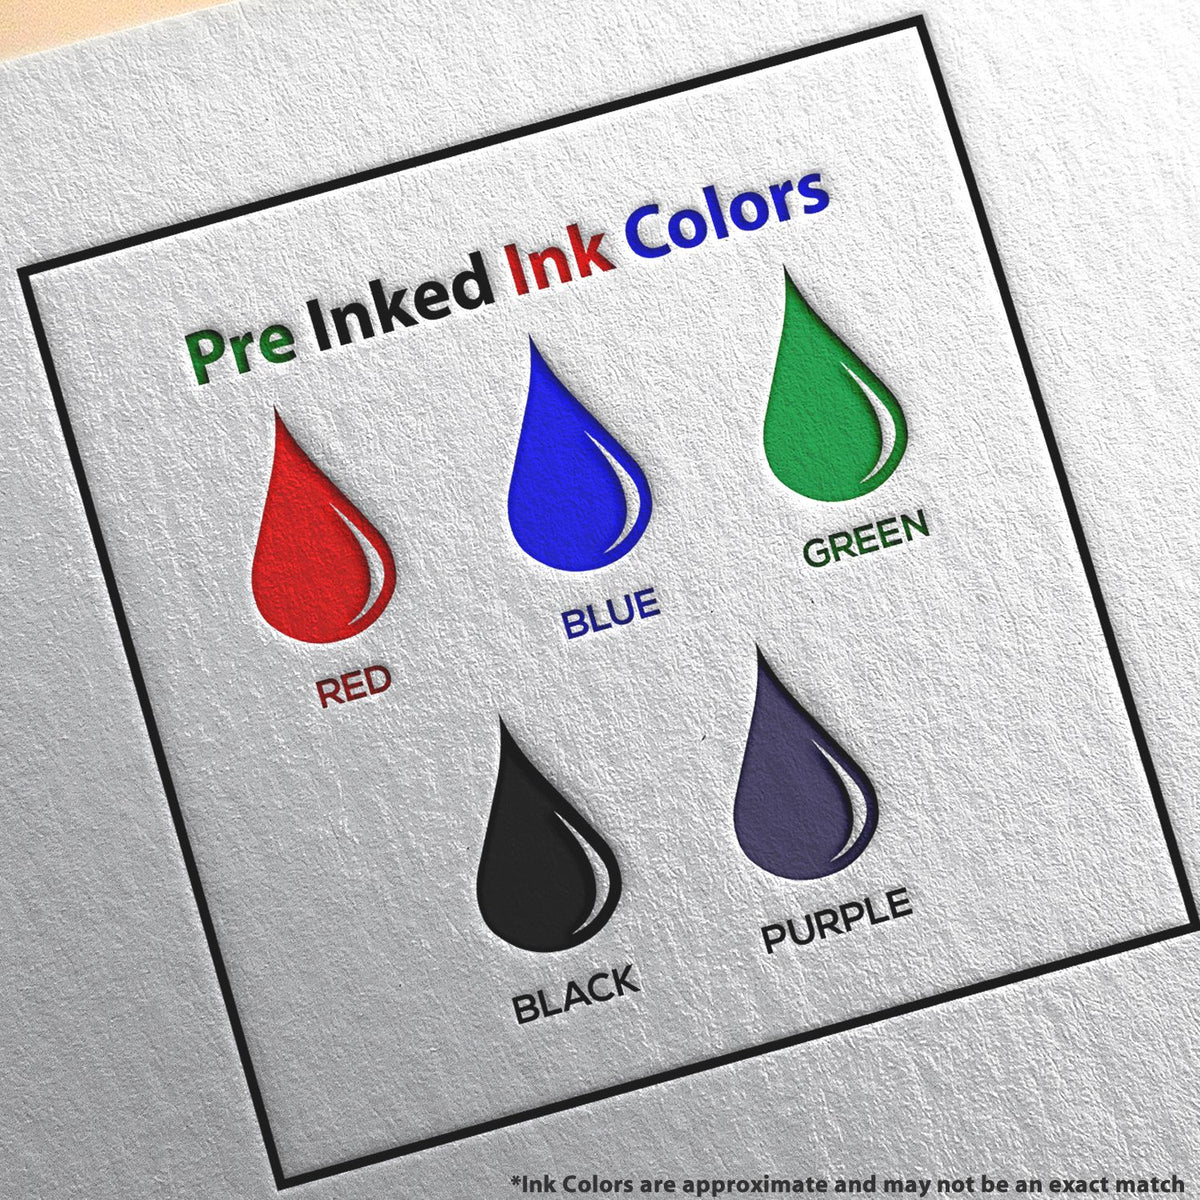 A picture showing the different ink colors or hues available for the Slim Pre-Inked Ohio Land Surveyor Seal Stamp product.